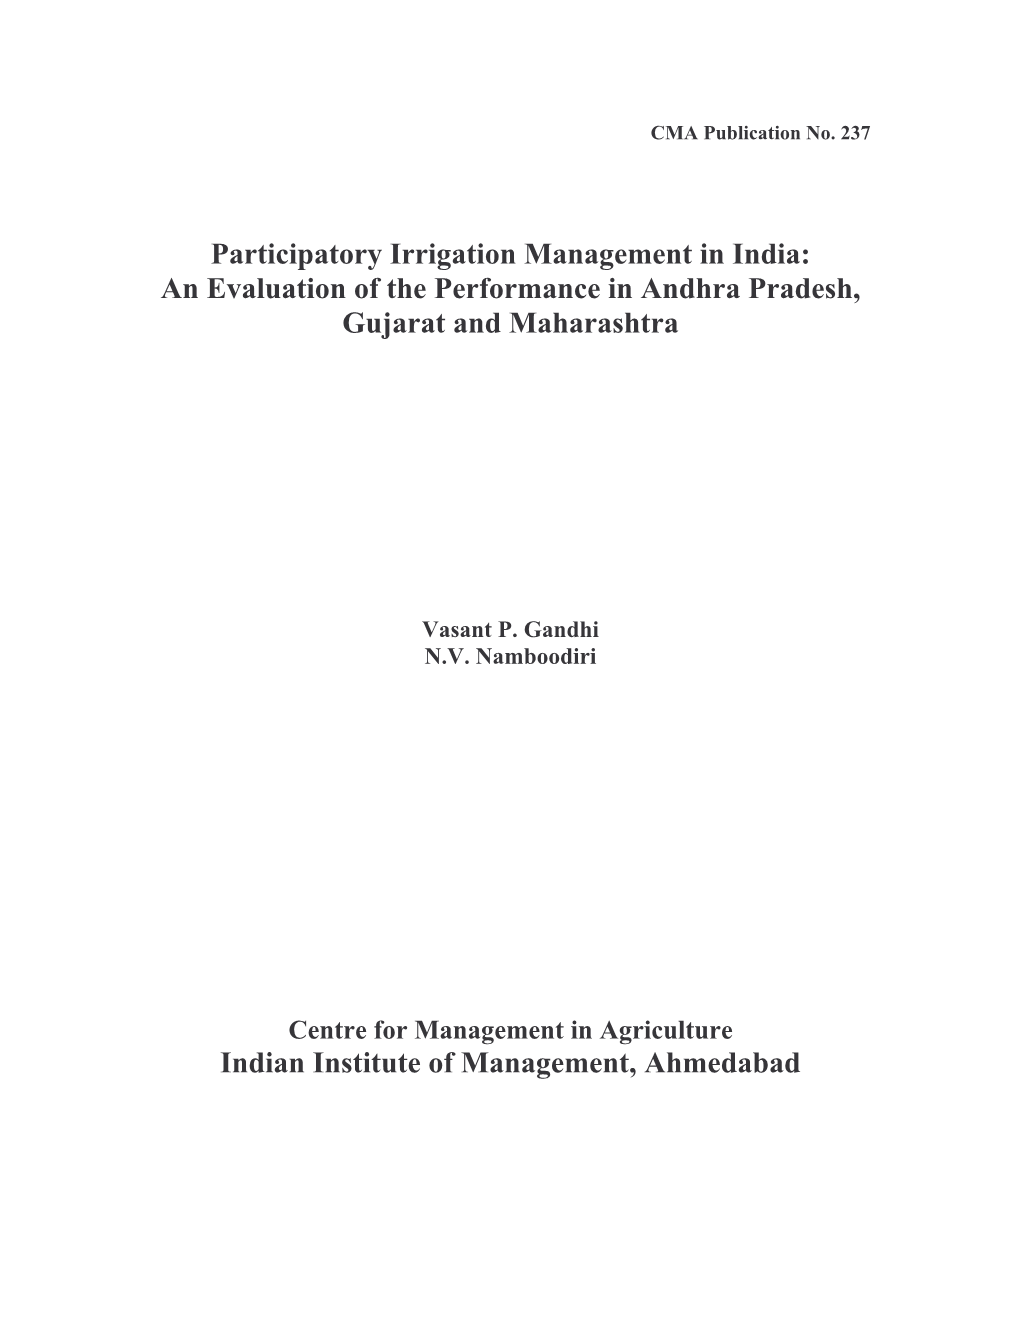 Participatory Irrigation Management in India: an Evaluation of the Performance in Andhra Pradesh, Gujarat and Maharashtra